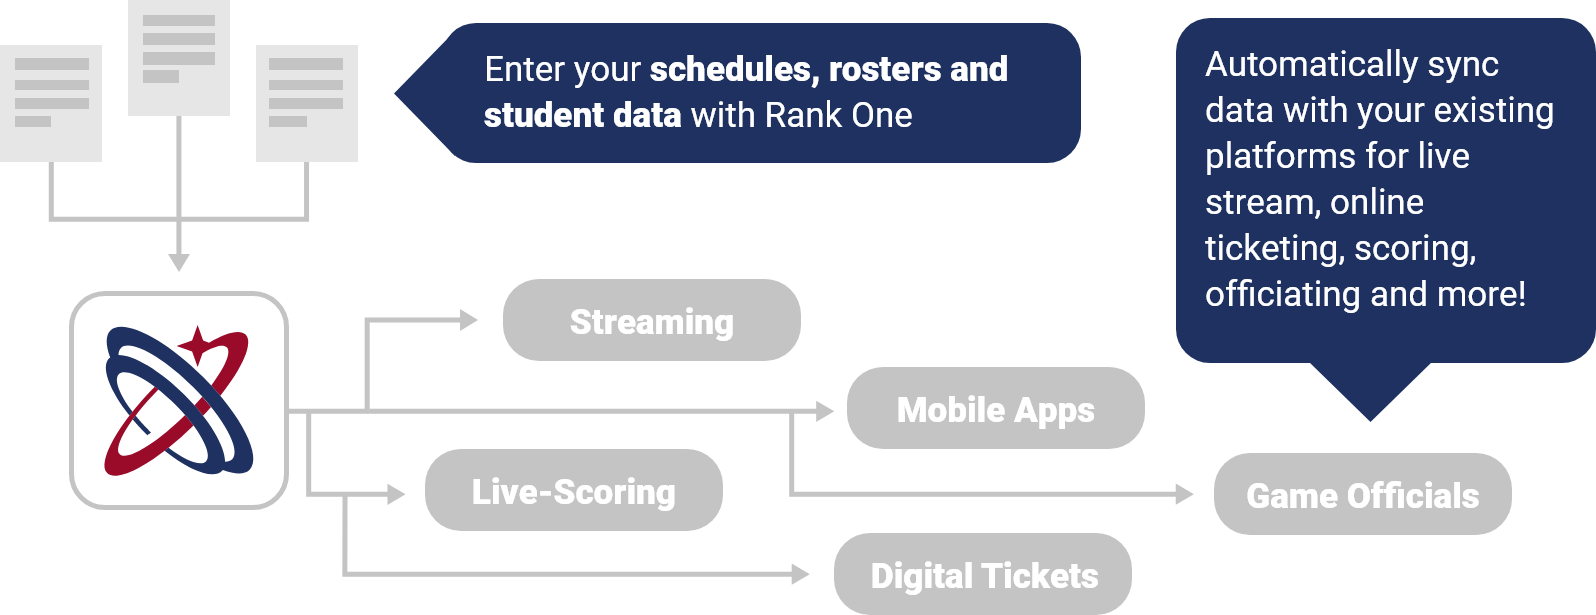 Enter your schedules, rosters, and student data with Rank One. Automatically Sync data with your existing platforms for live stream, online ticketing, scoring, officiating and more!